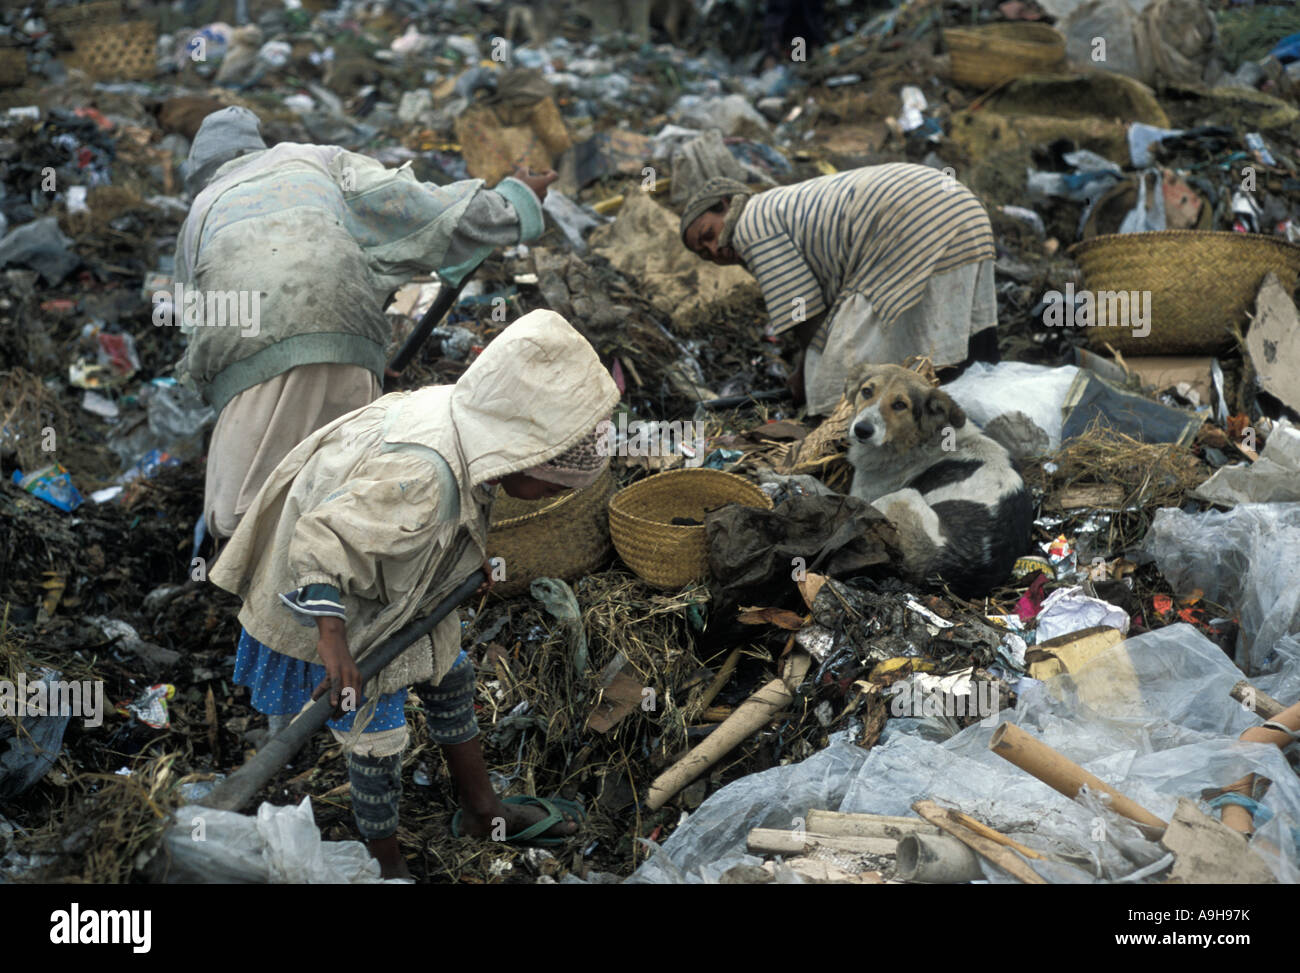 At the outside of Antananarivo Madagascar on a hill overlooking the city entire families scavenge the dump Stock Photo